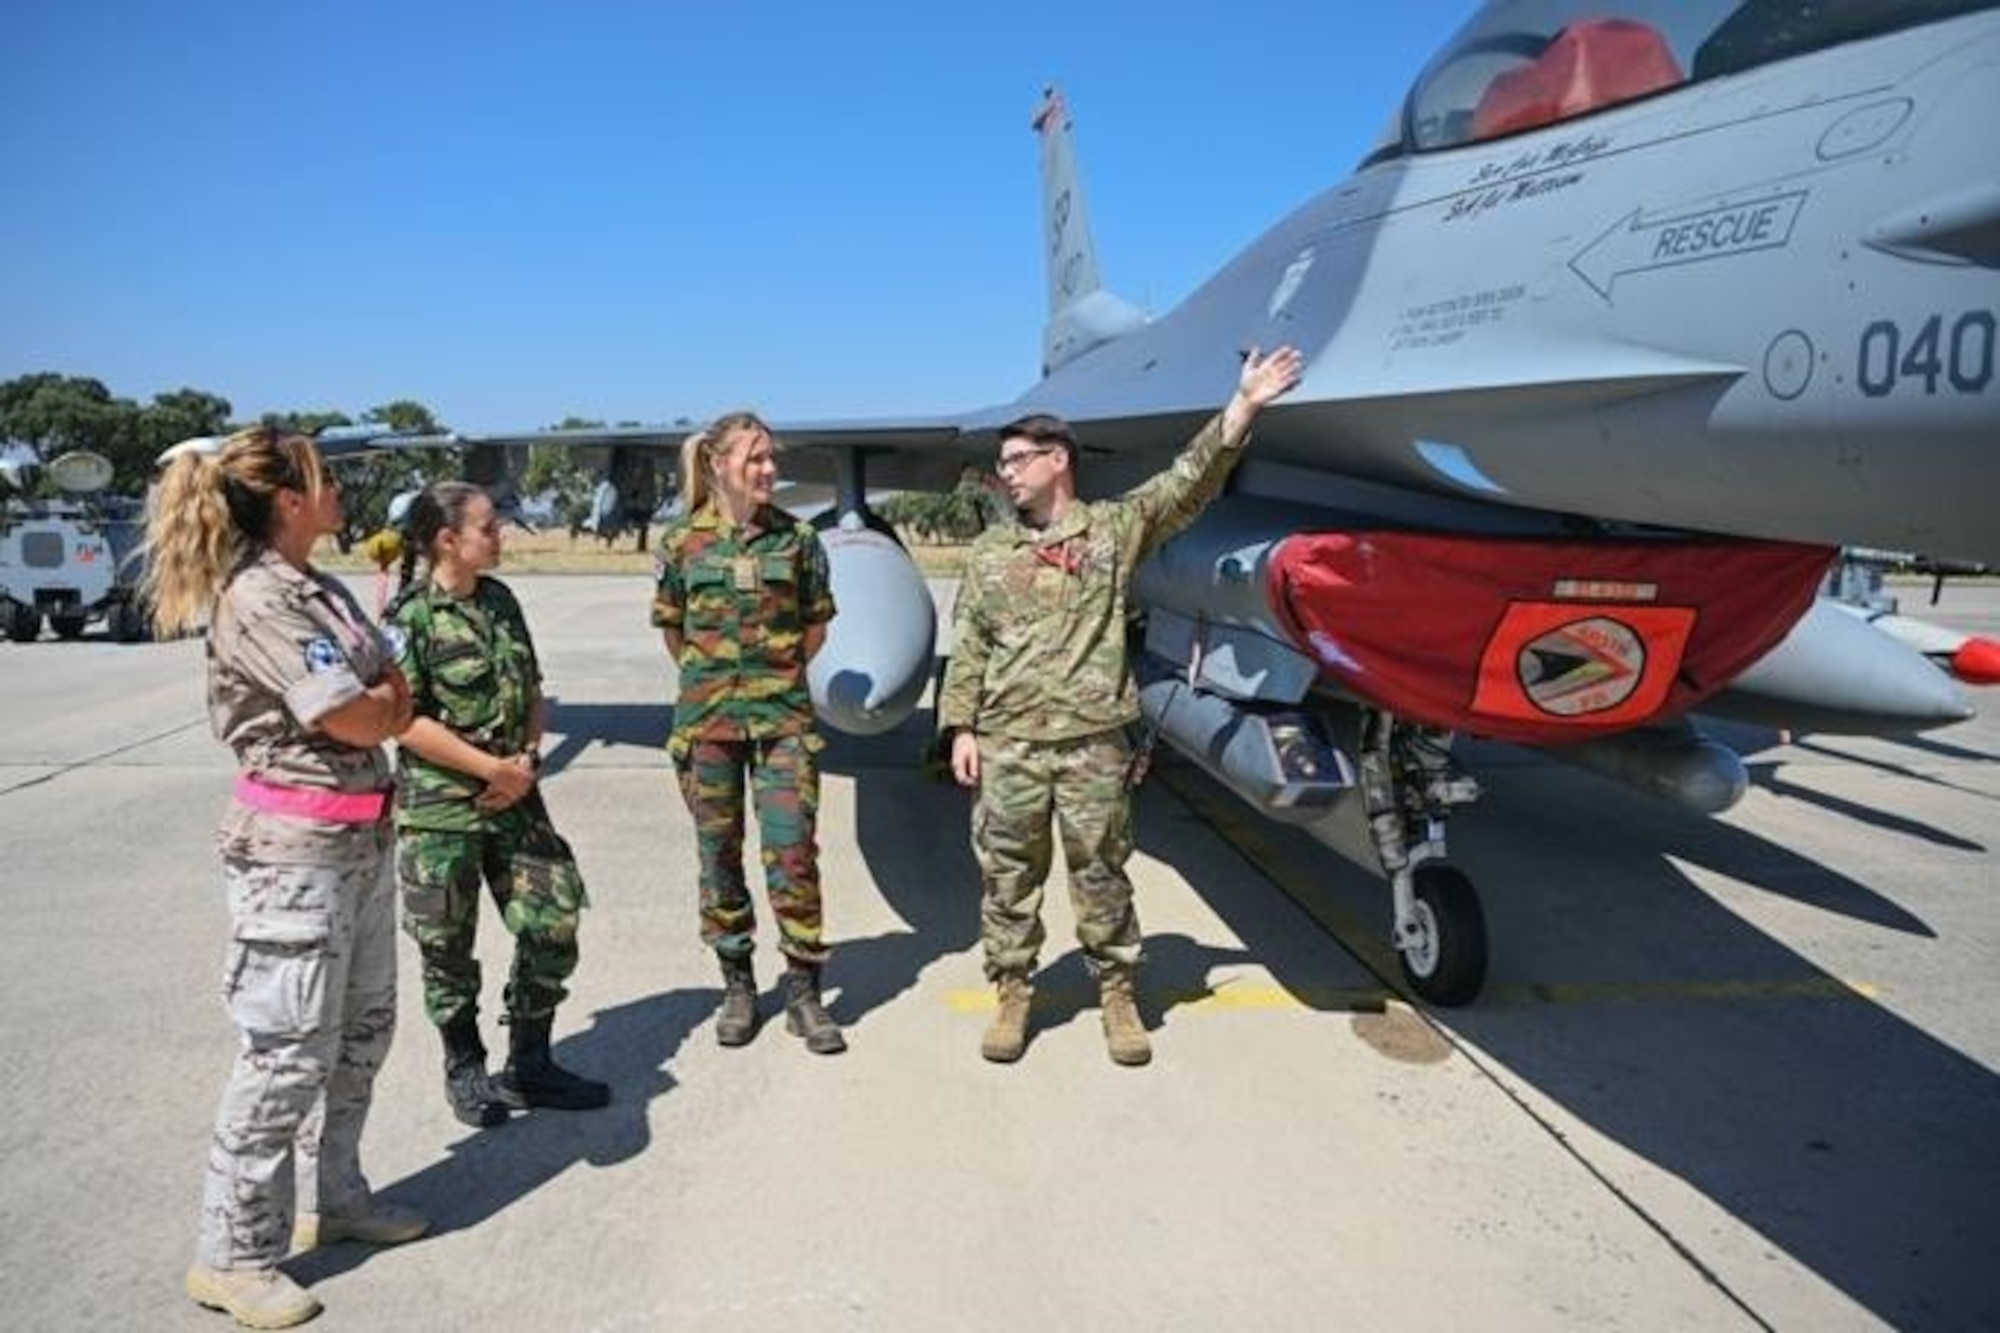 U.S. Air Force Tech. Sgt. Donovan Guffey, 480th Fighter Squadron specialist expediter (right), stationed at Spangdahlem Air Base, Germany, discusses some of the functions of a U.S. Air Force F-16 Fighting Falcon aircraft to NATO partners from Spain, Belgium and Portugal at Exercise Real Thaw 22 on Beja Air Base, Portugal, July 6, 2022. Training alongside Allies and neighbors in Europe helps the United States maintain the relationships and trust essential for ensuring regional security. (U.S. Air Force photo by Tech. Sgt. Warren D. Spearman Jr.)